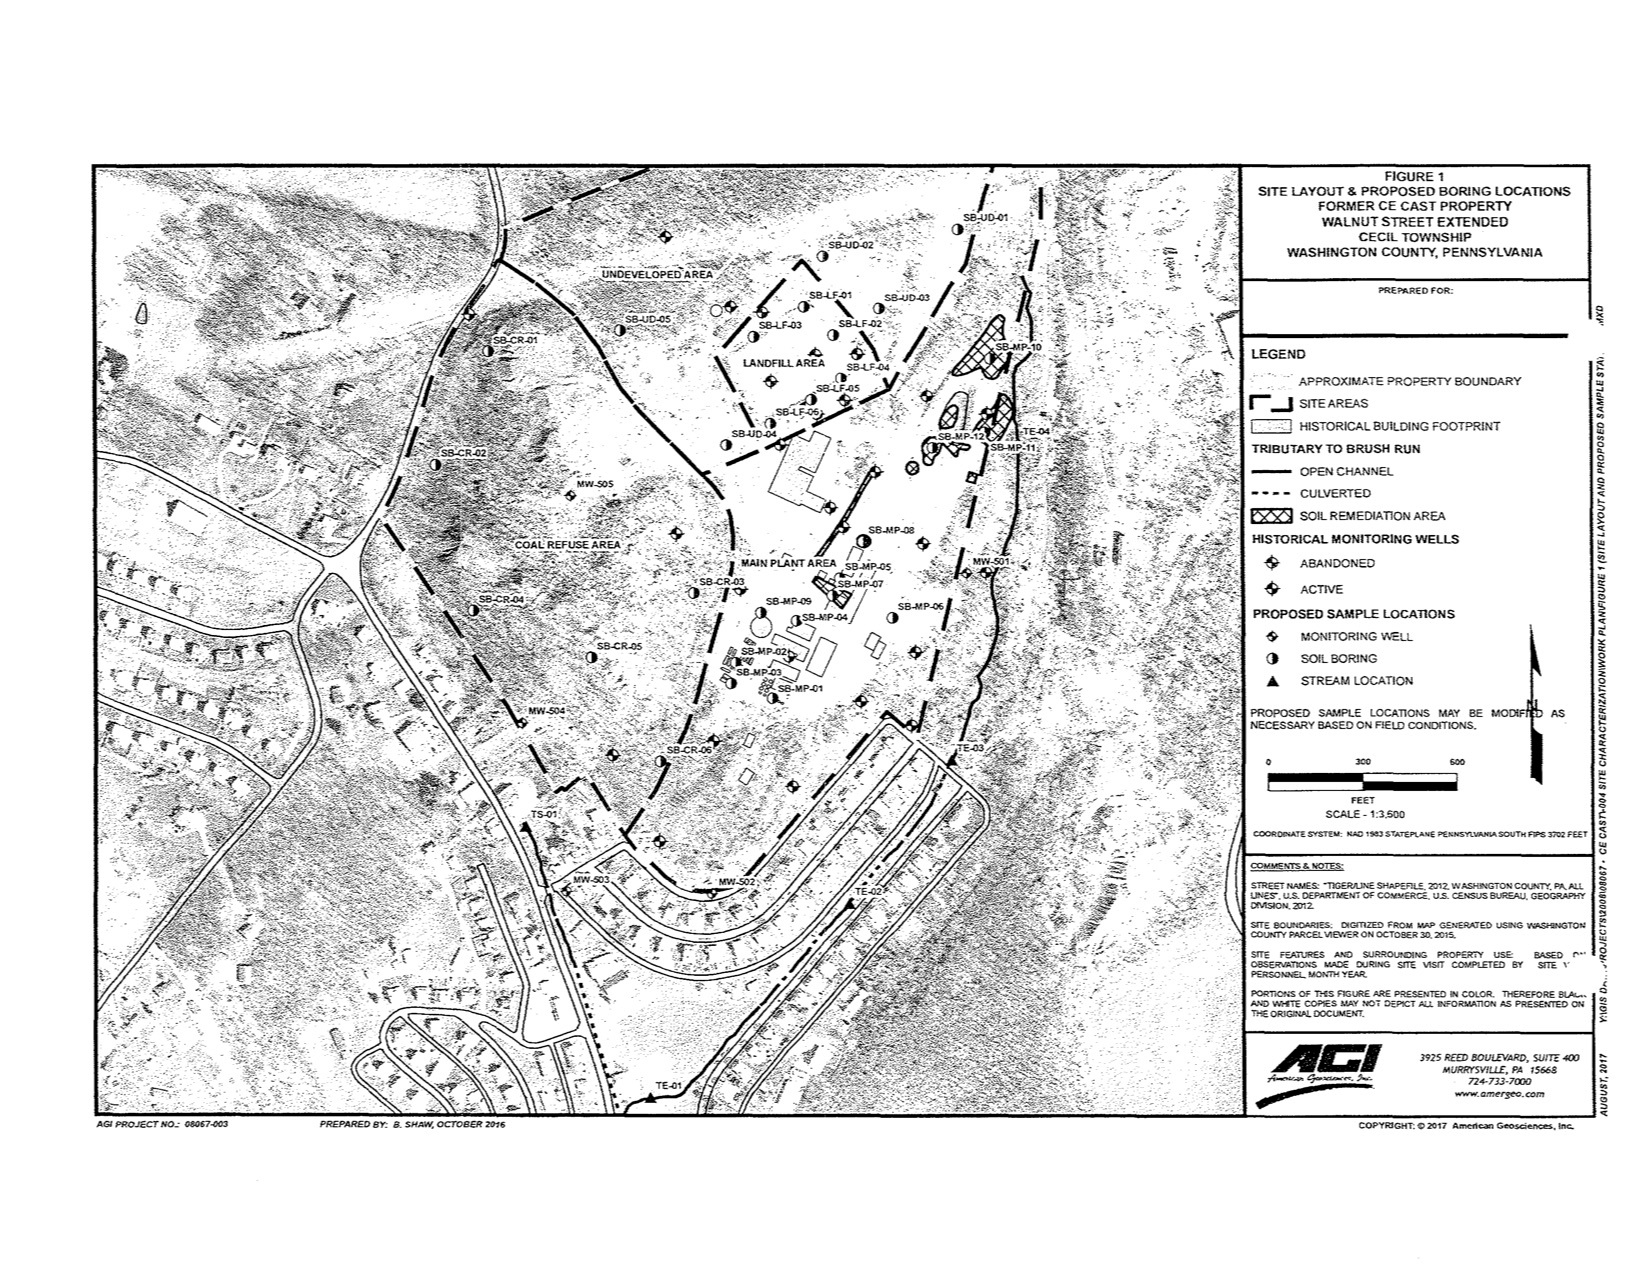 A Fact Sheet on the Cecil Township ABB Property Agreement